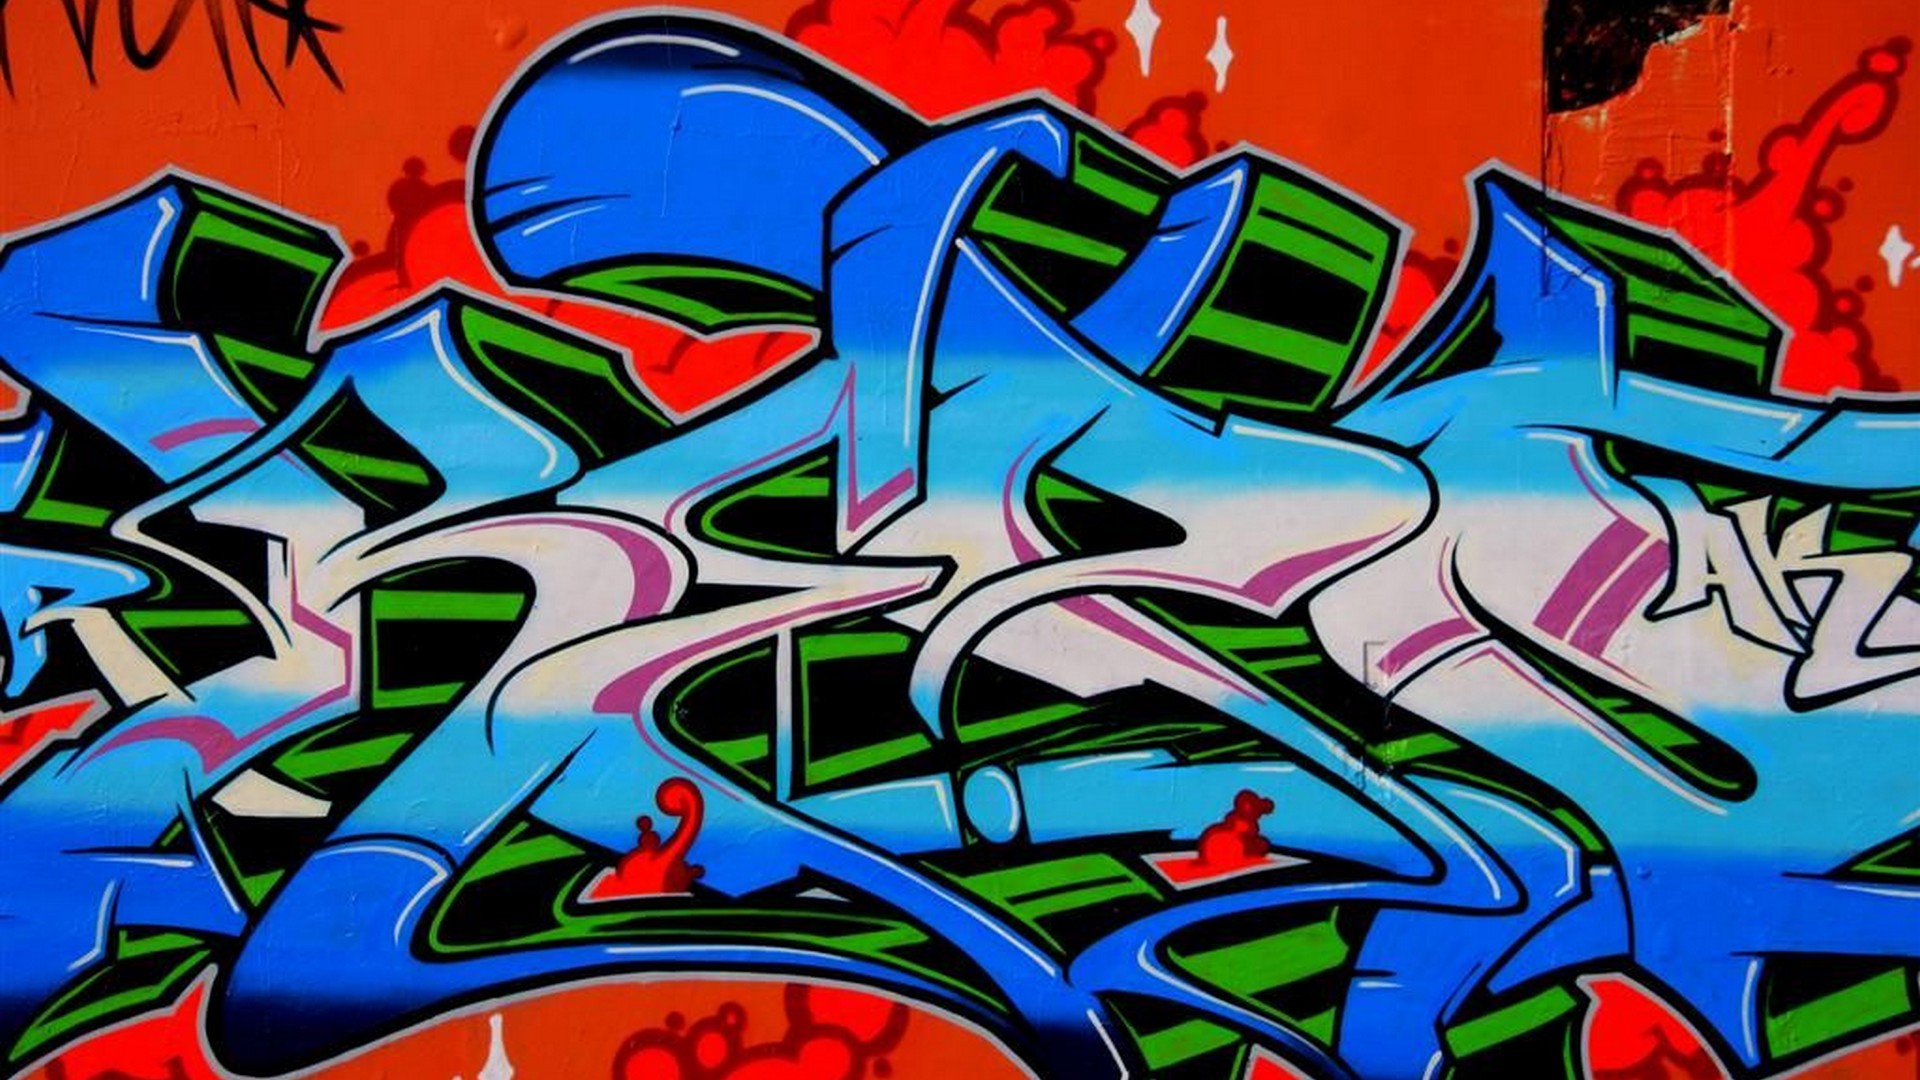 Wallpaper HD Graffiti Letters With Resolution 1920X1080 pixel. You can make this wallpaper for your Desktop Computer Backgrounds, Mac Wallpapers, Android Lock screen or iPhone Screensavers